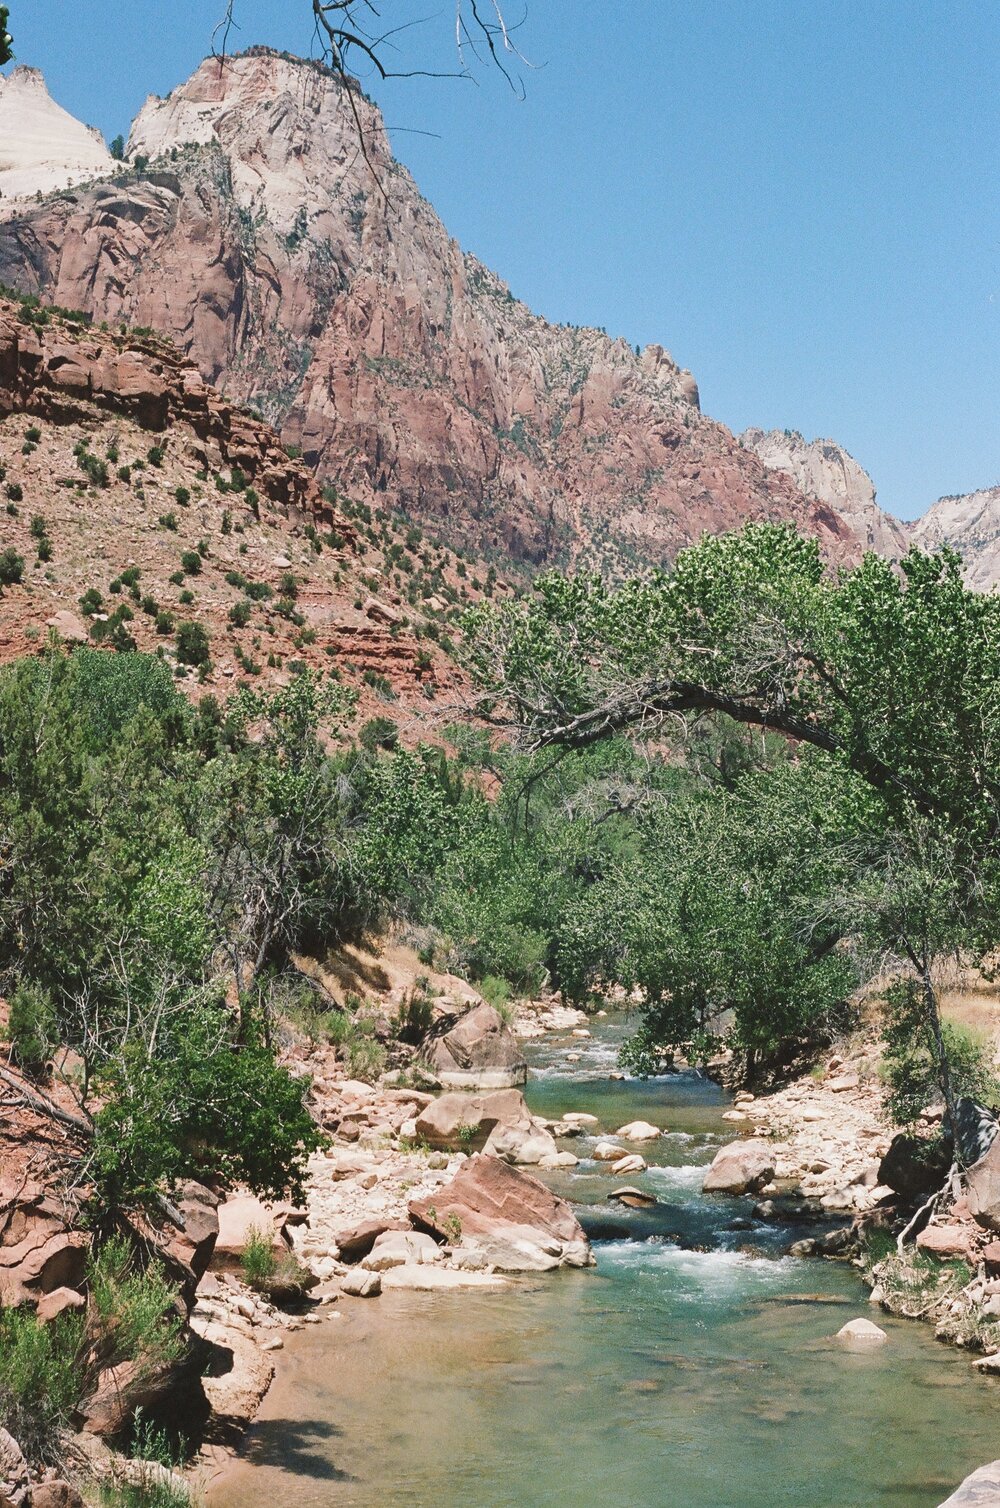  The Virgin River at Zion National Park - Photo by Erin Shaw 